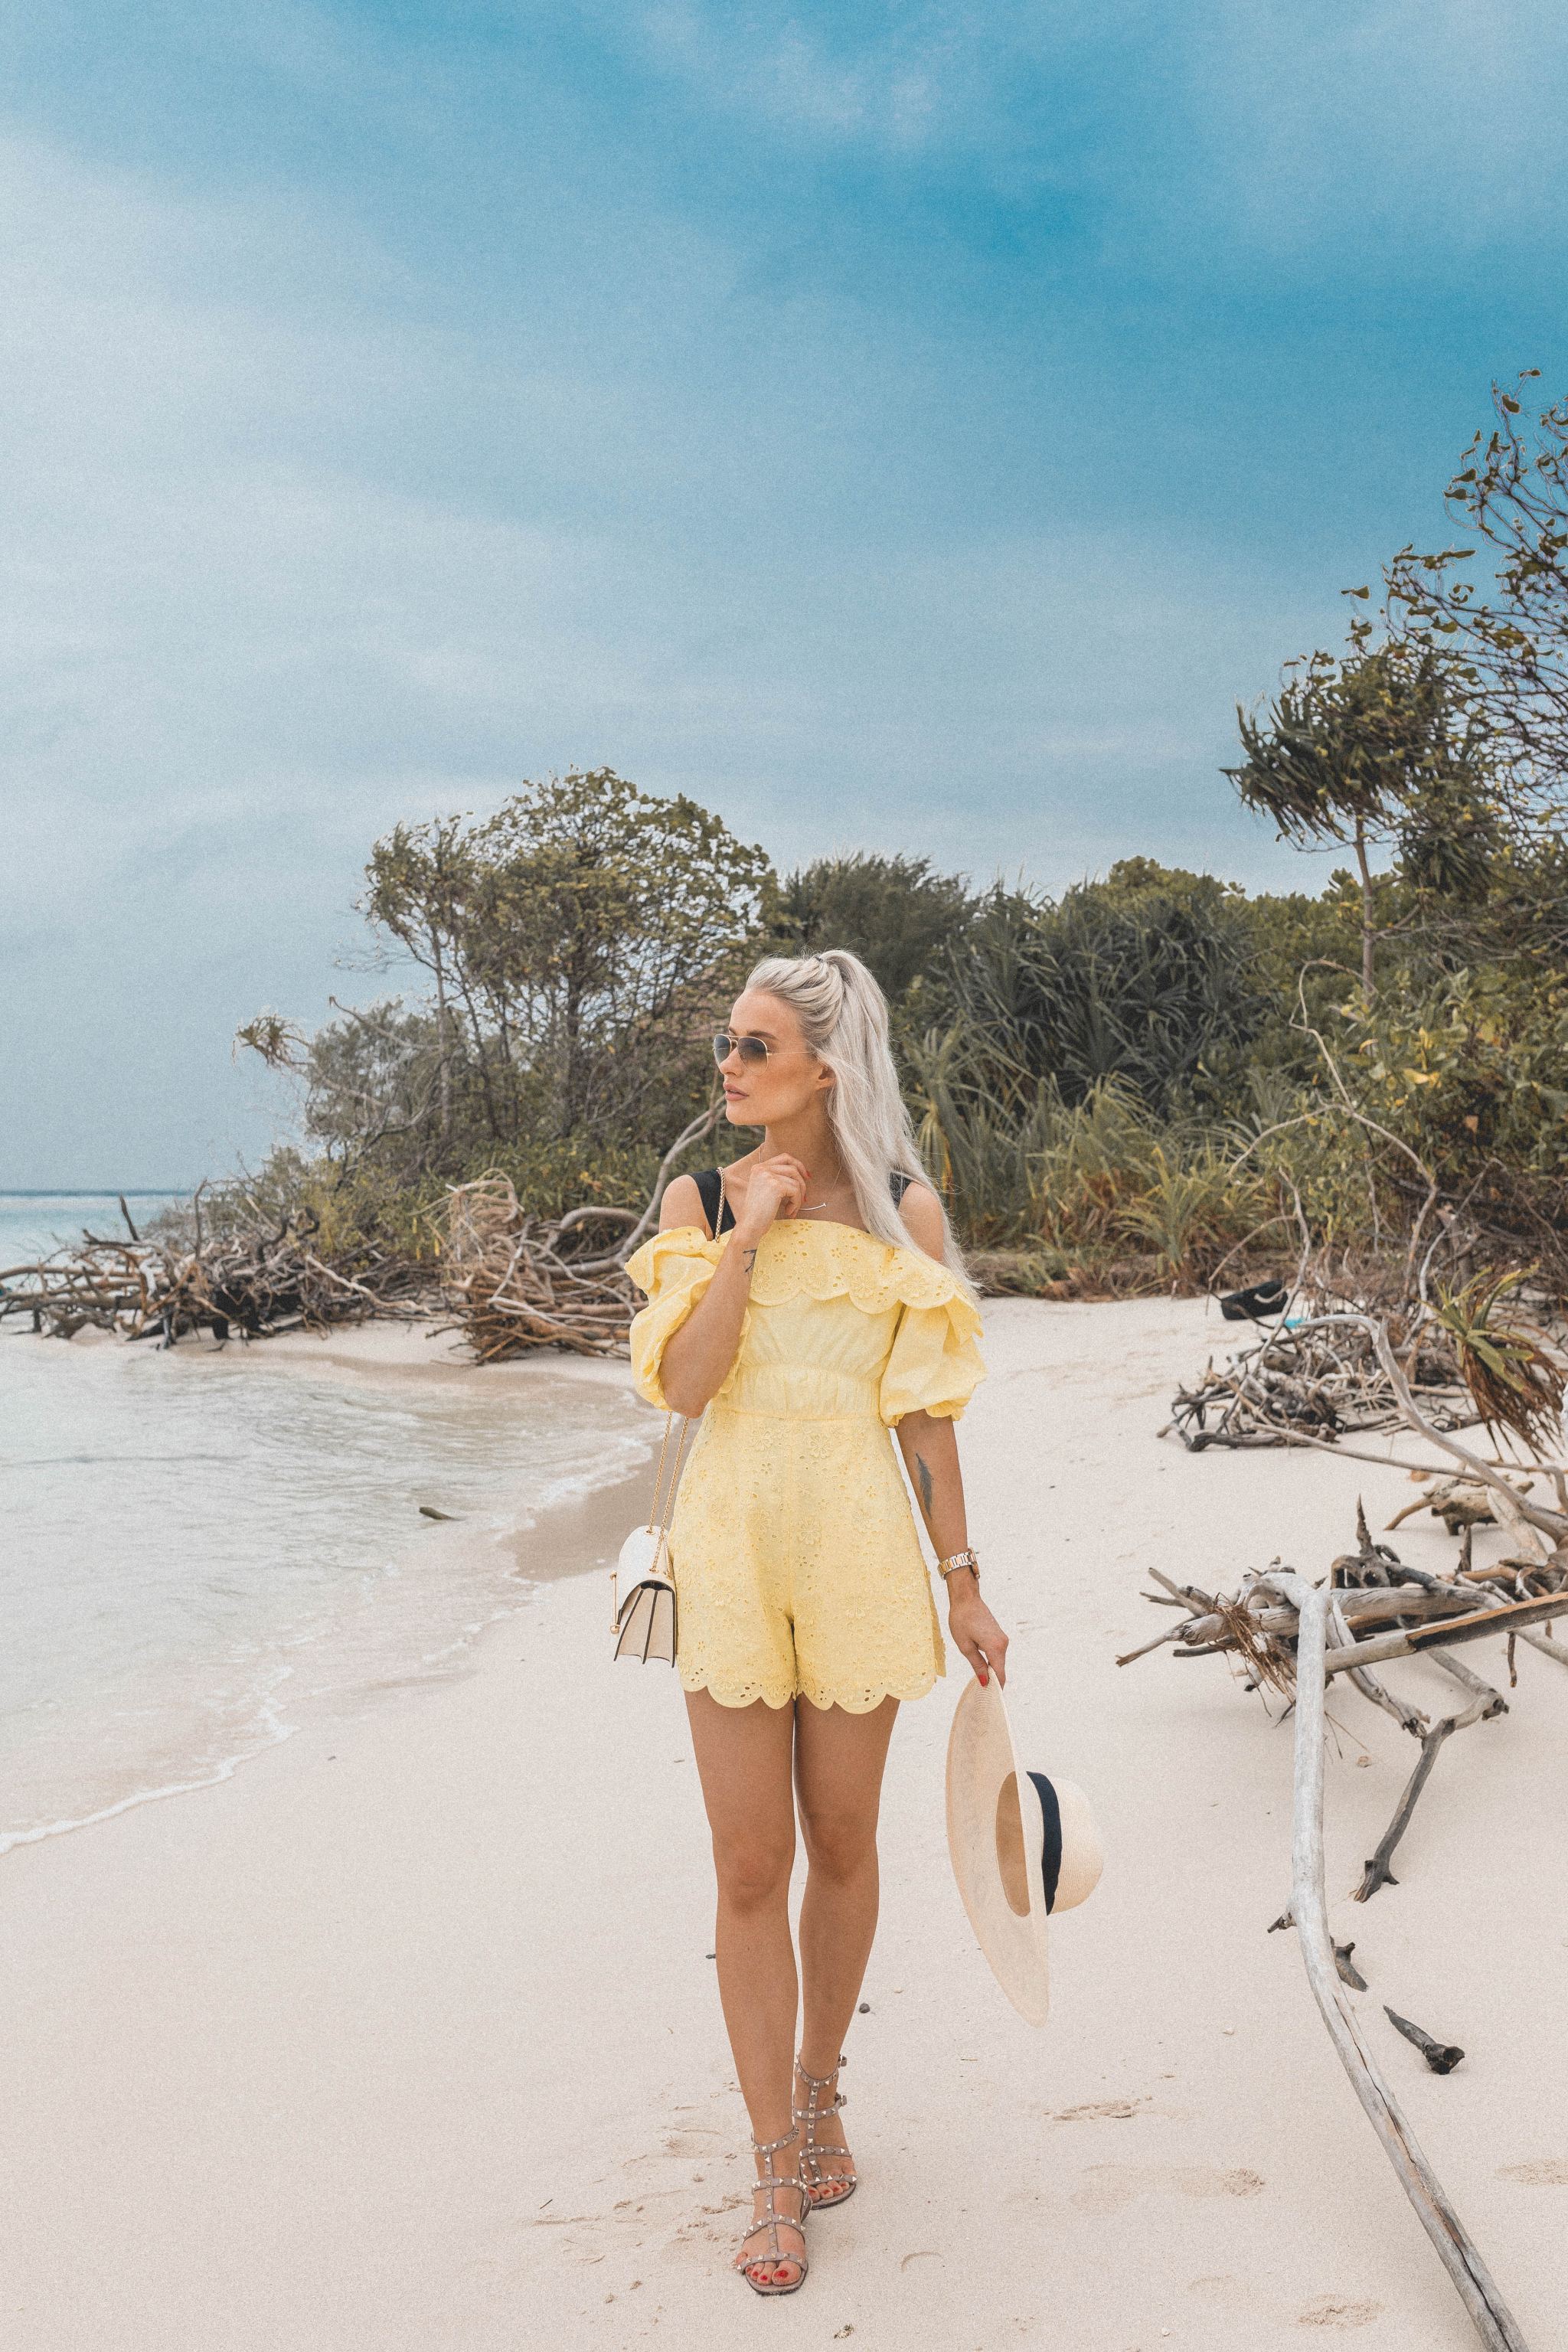 Why Kindness Will Get You Everywhere In Life - Inthefrow